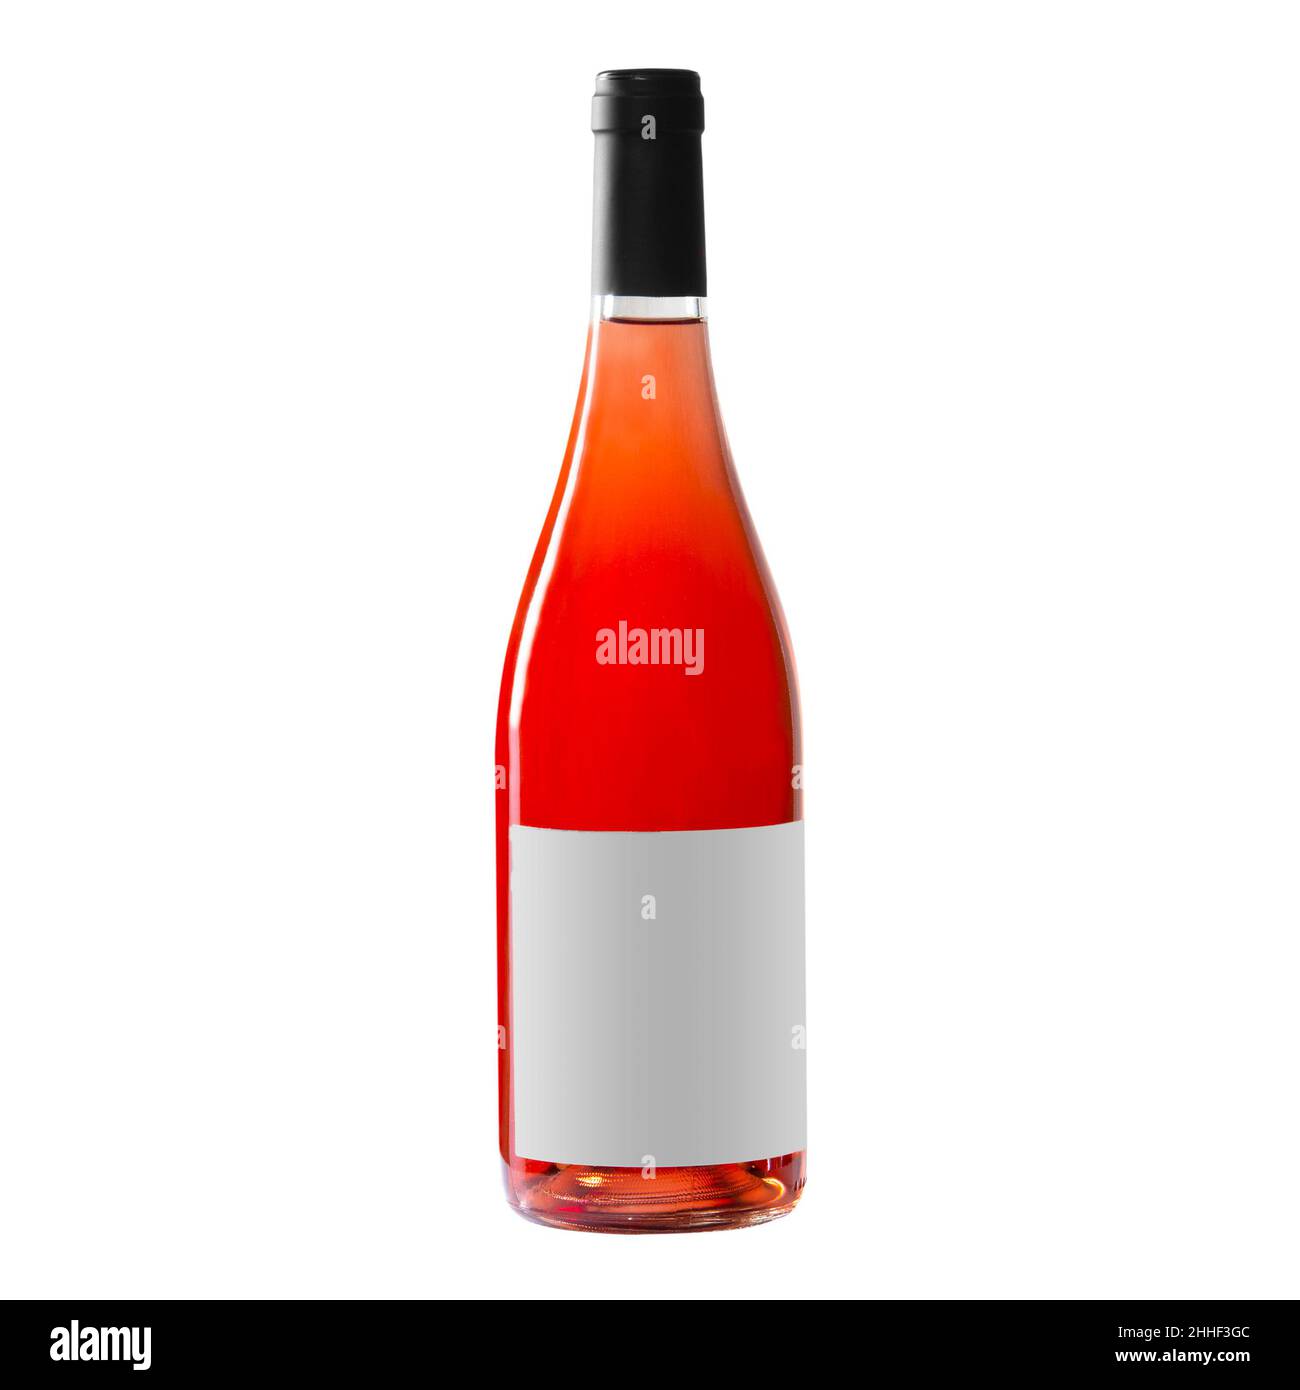 photography Wine images stock - label hi-res Alamy back and